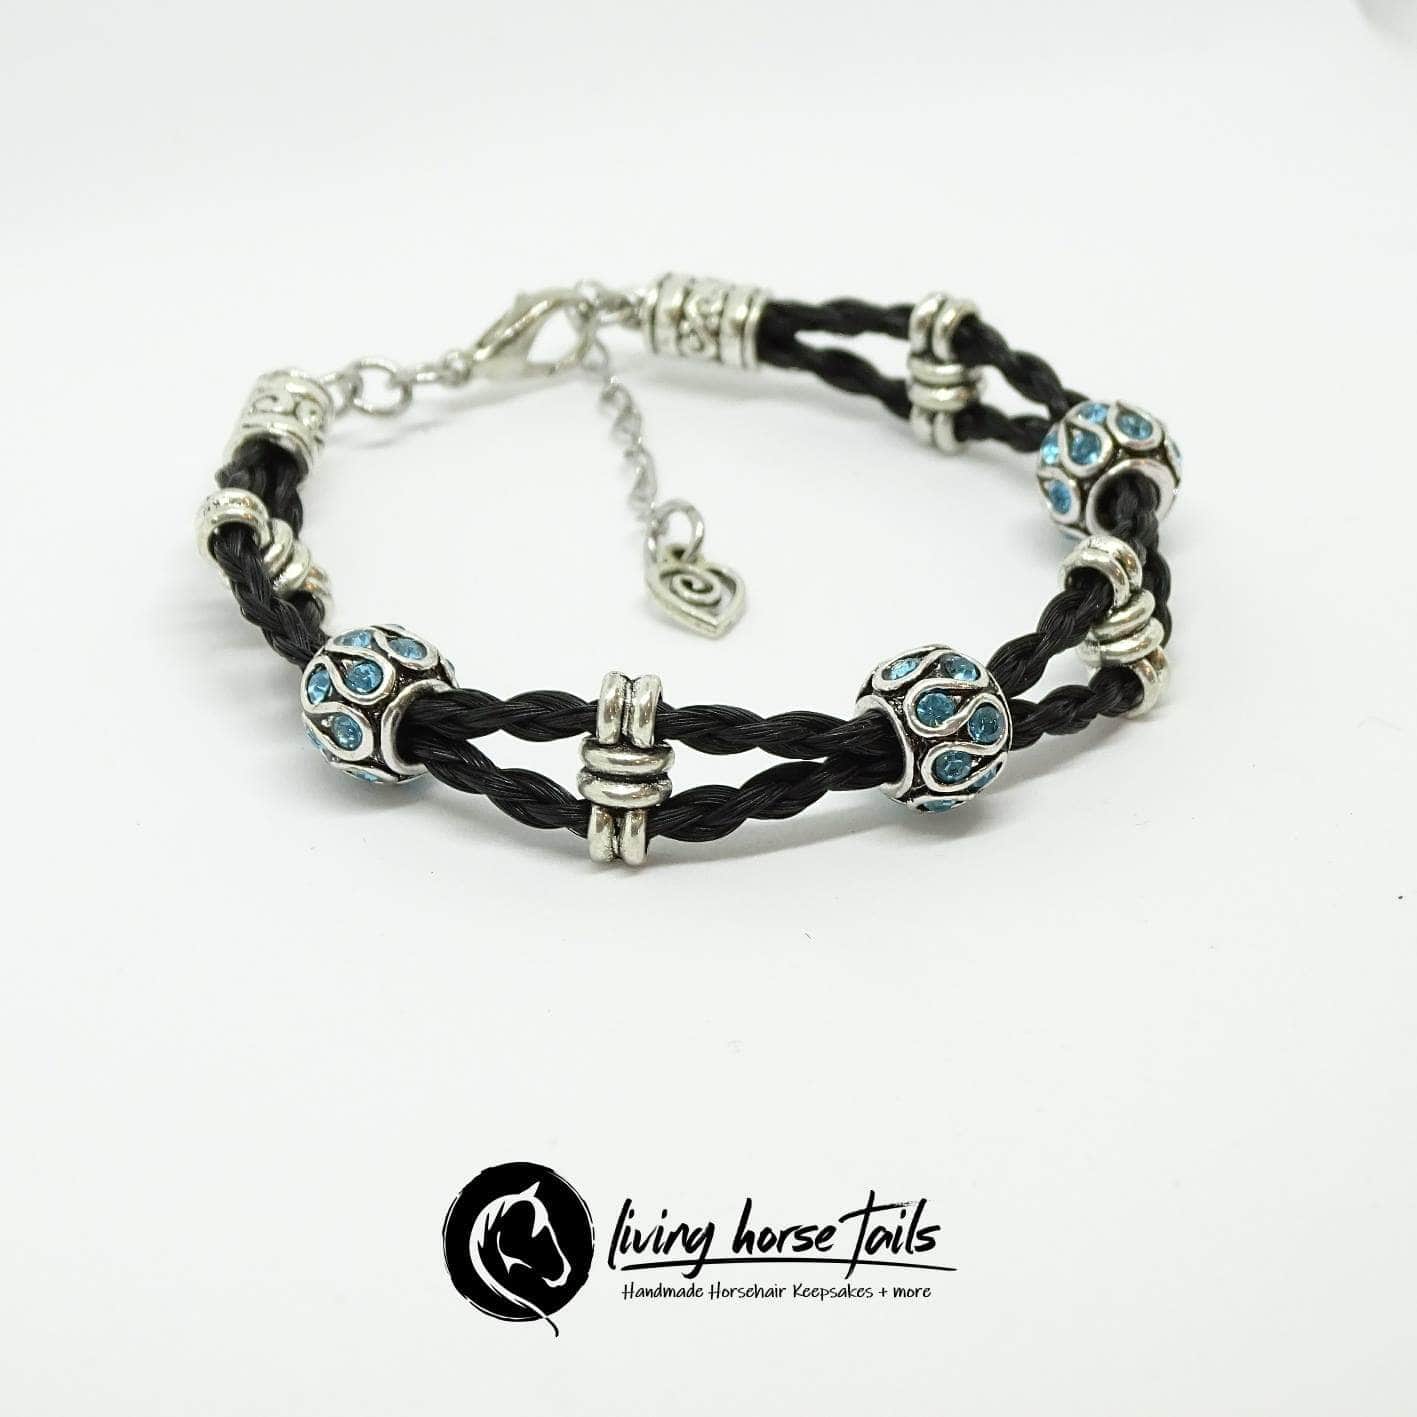 Double Strand Braided Horsehair Bracelet with Blue Bead using Horse Ha ...